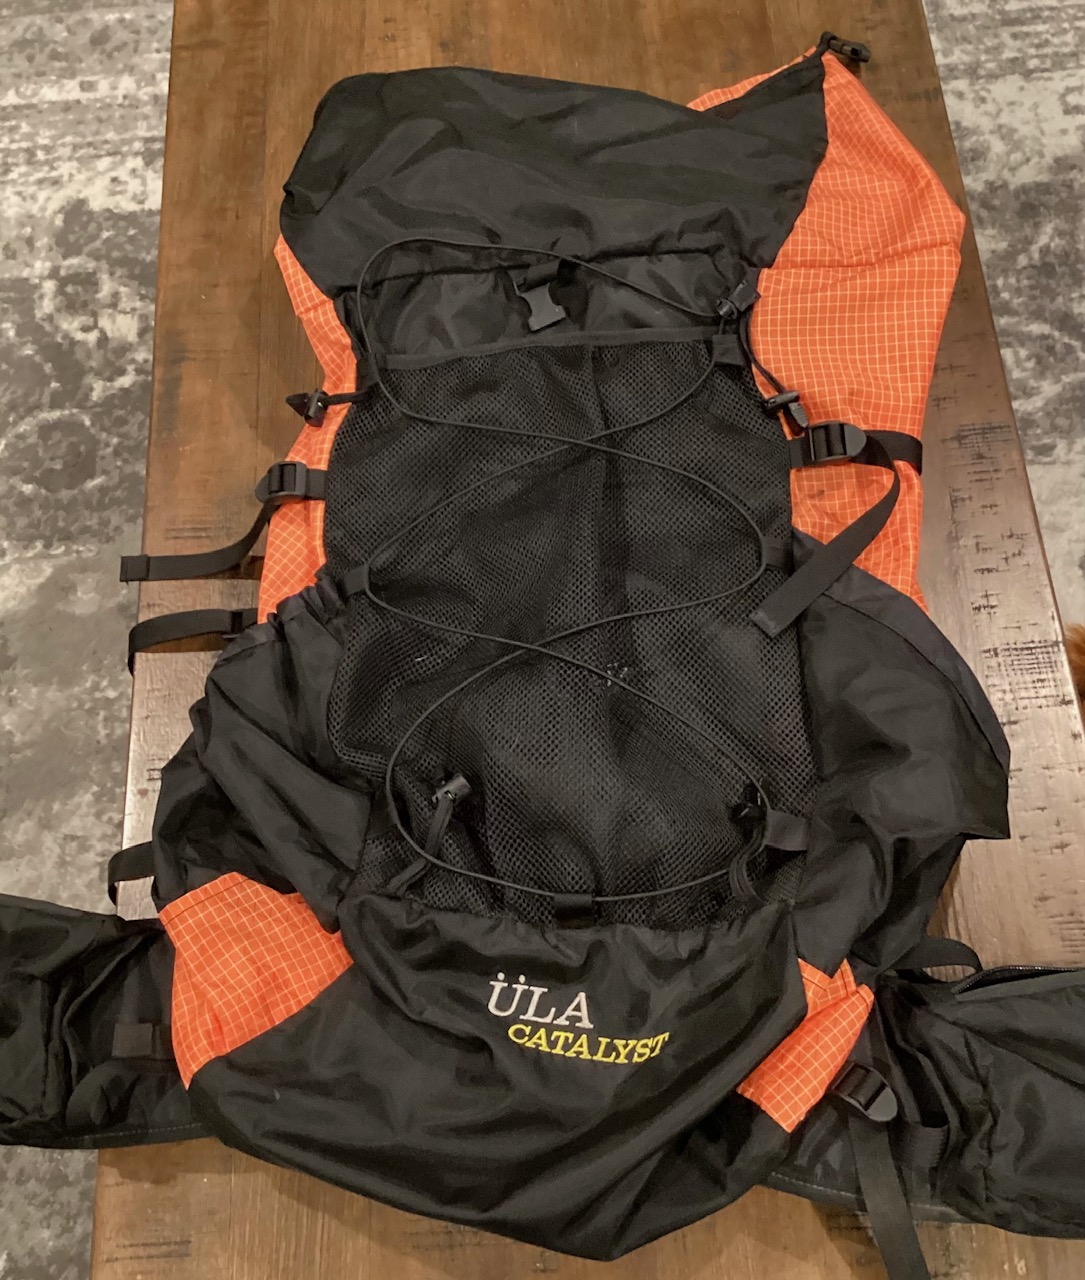 Shop for ULA Catalyst backpack - Information, Reviews